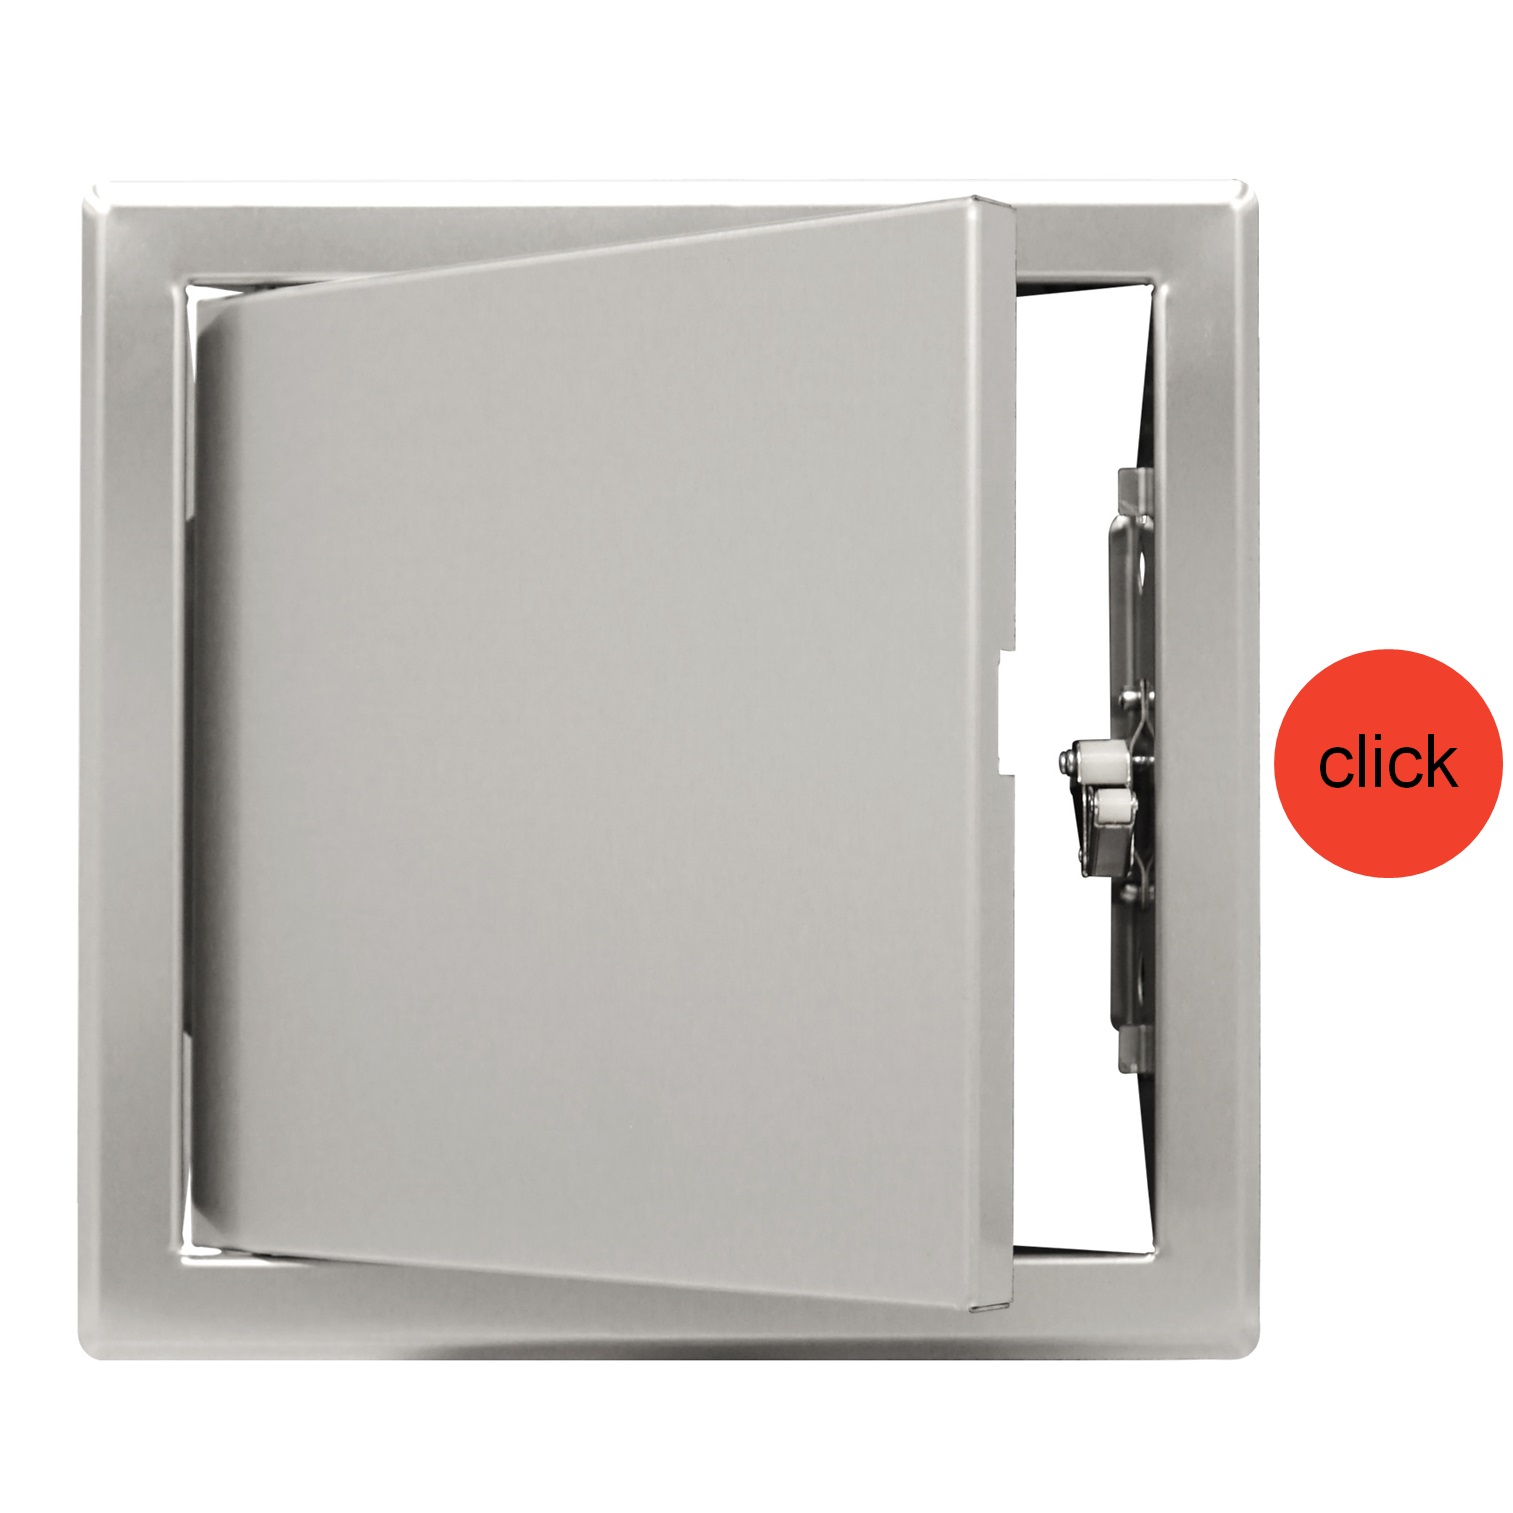 inspection hatch for interior work metal, 200x200mm CLICK inox